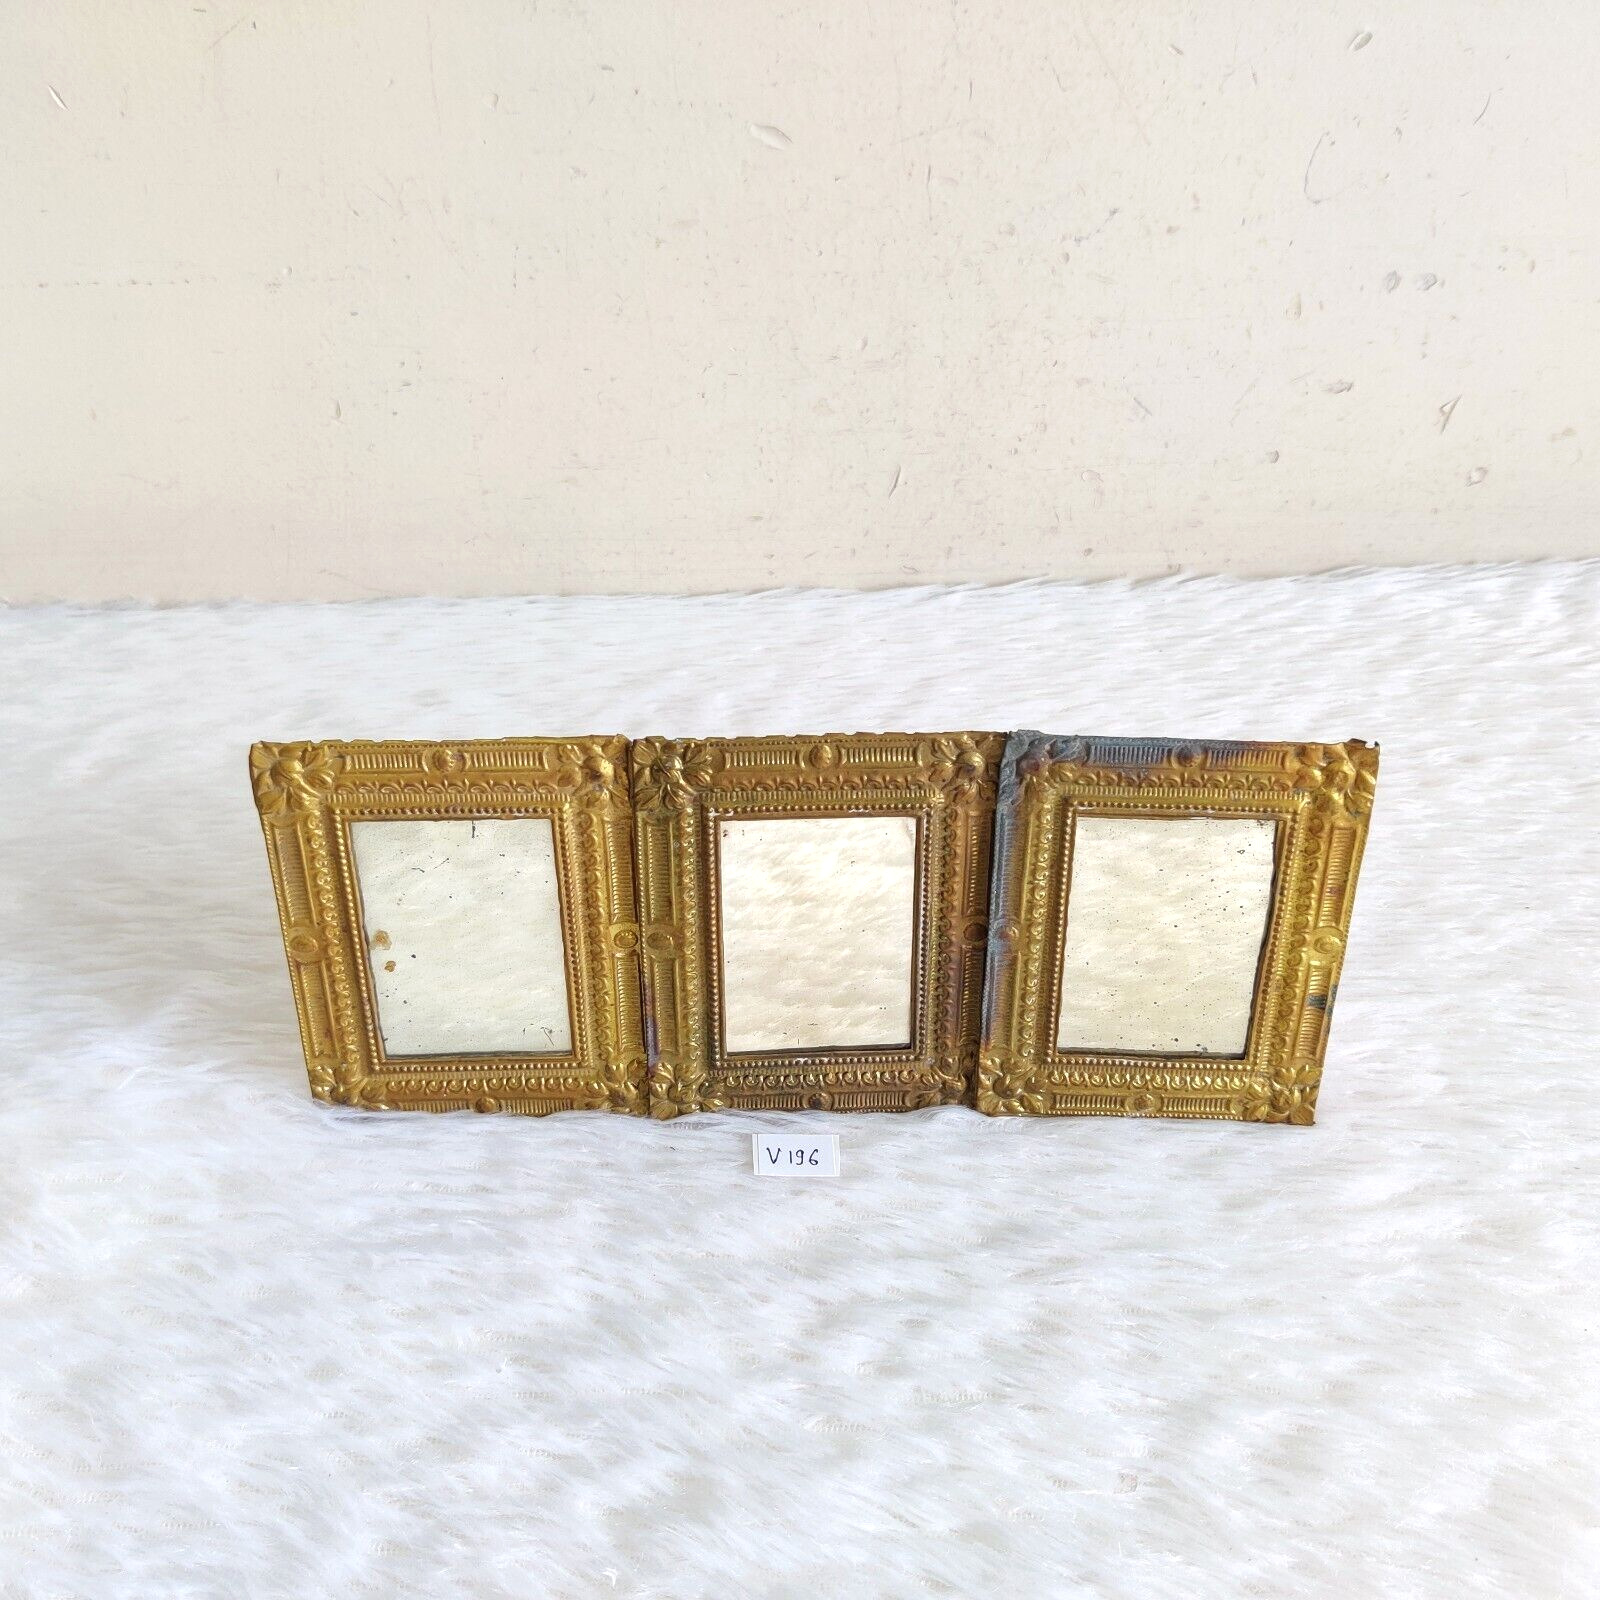 1940s Vintage Glass Mirror Tin Frame Old Vanity Decorative Collectible 3Pcs V196